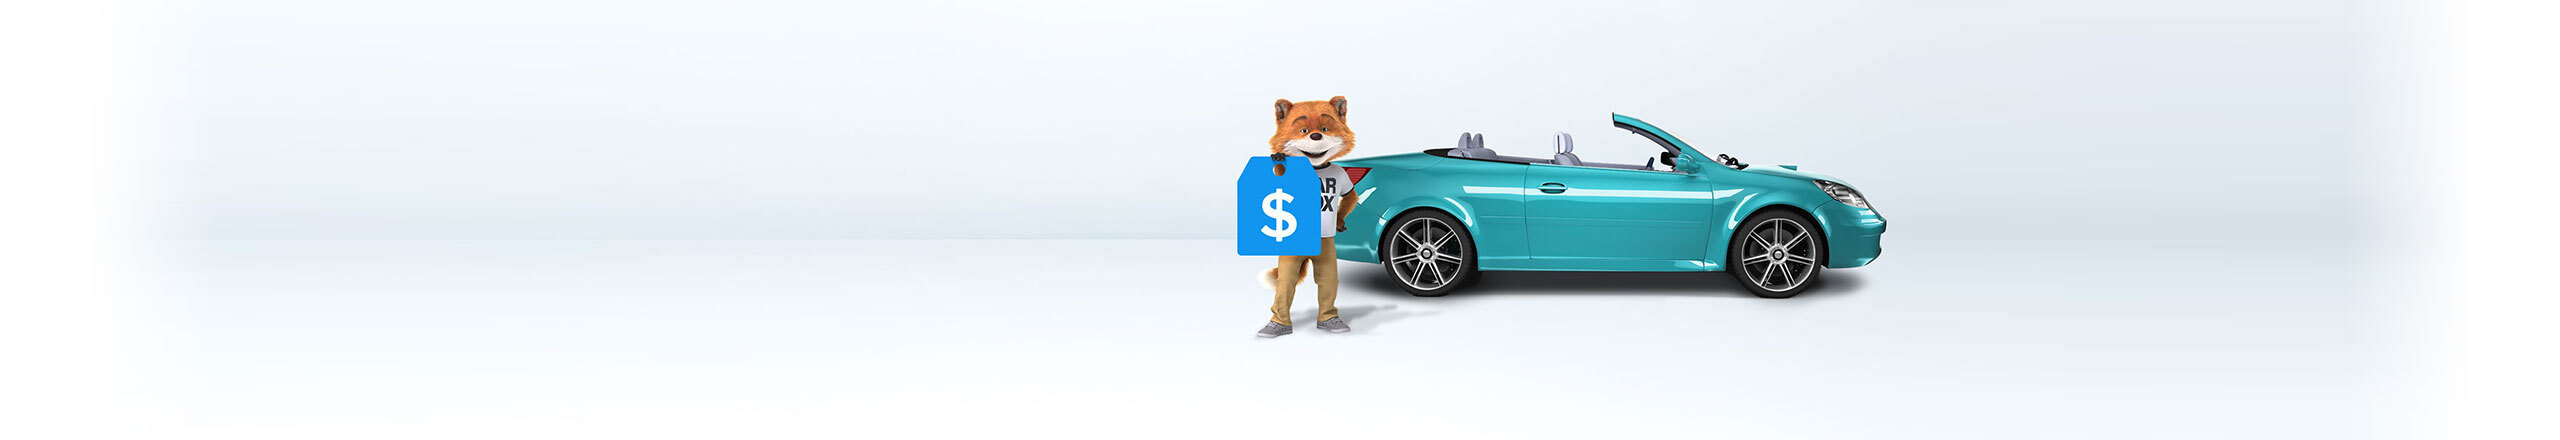 CARFAX Canada’s mascot, CAR FOX, standing in front of a sedan.